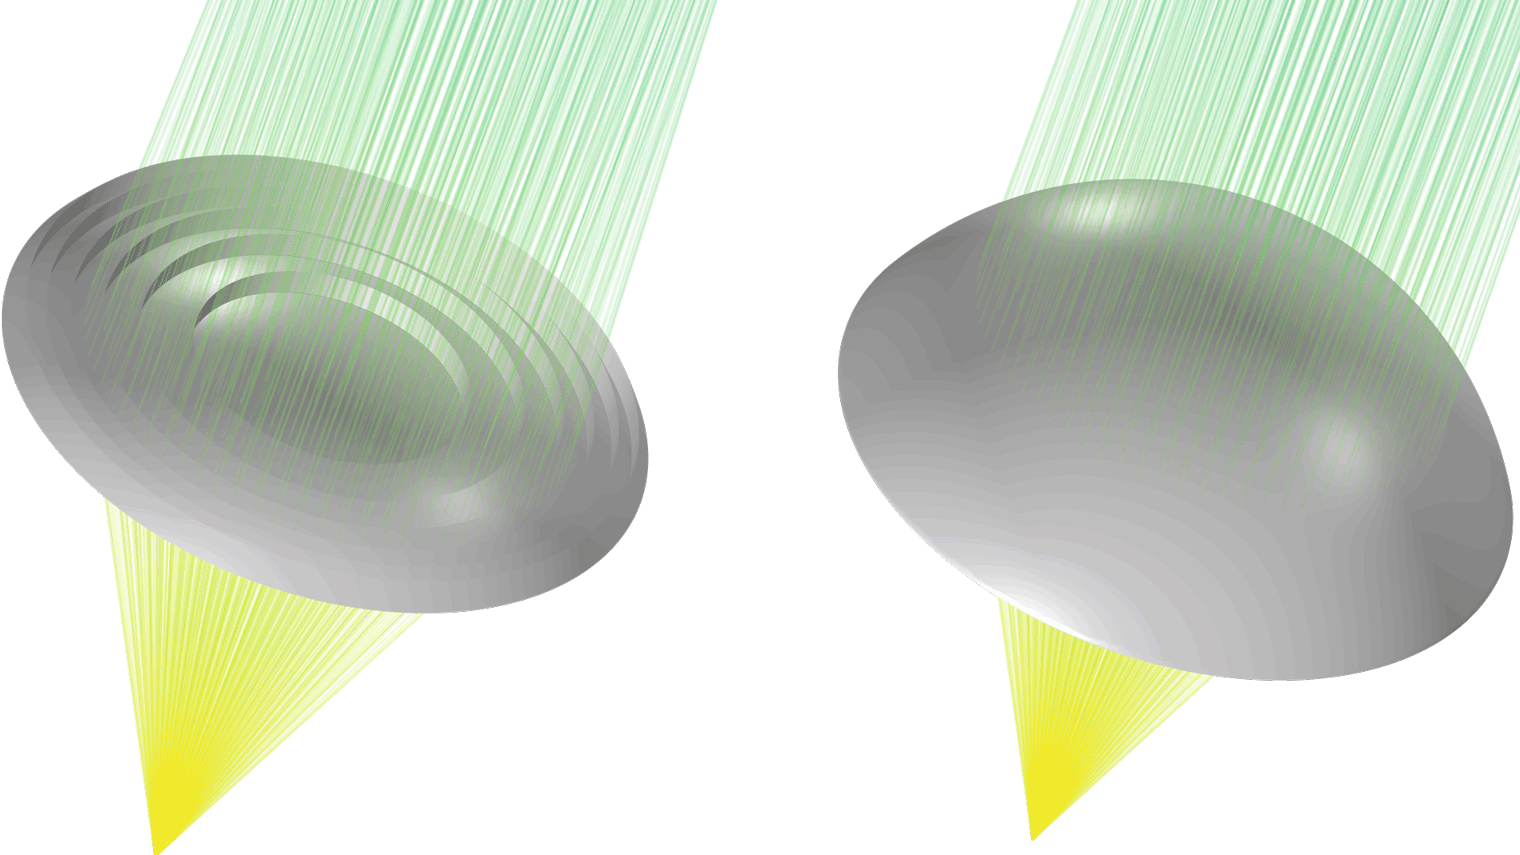 Two lens models showing the ray collimation in the Traffic Flow color table.